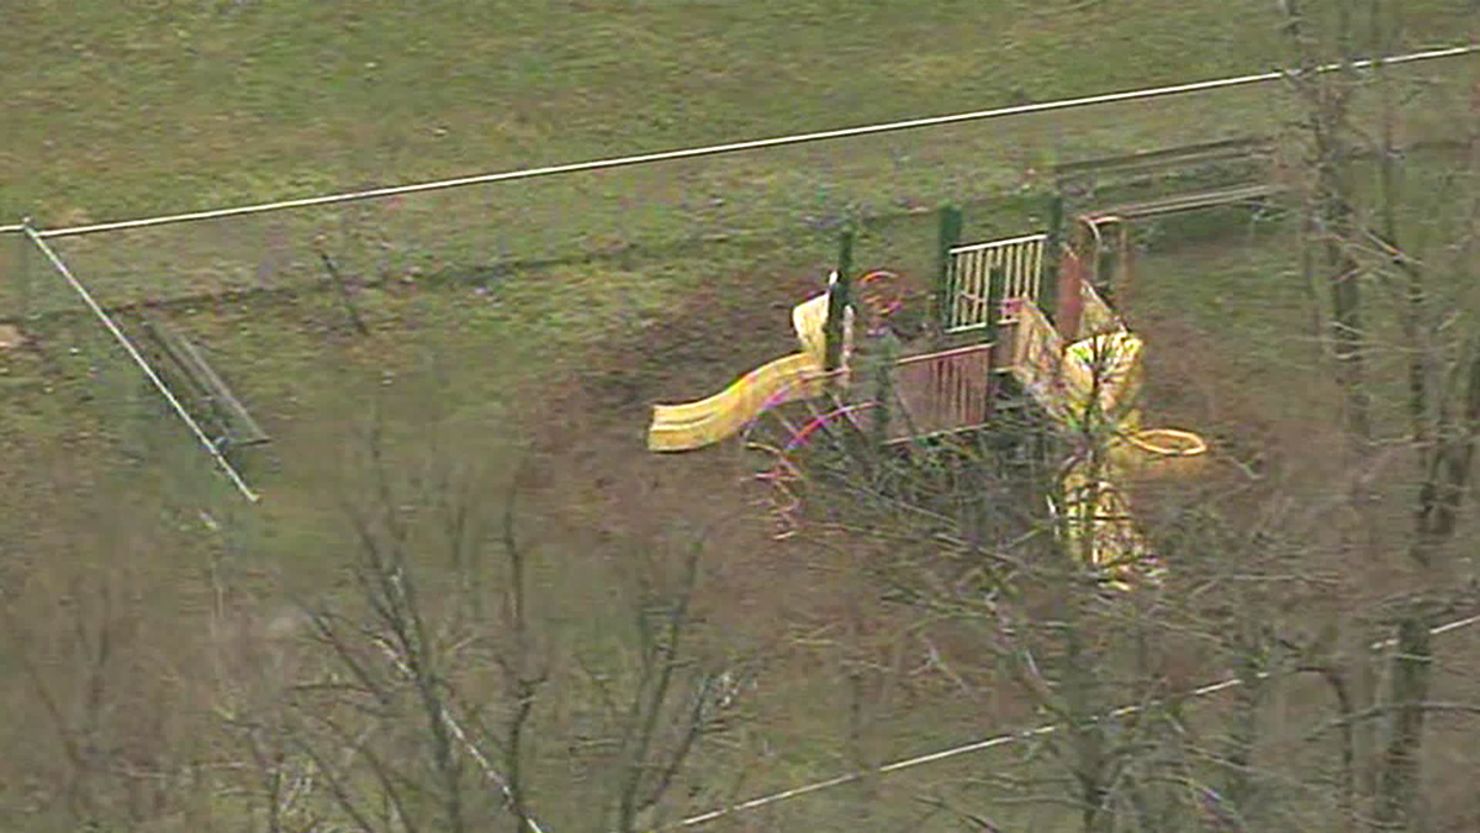 An aerial image of the playground where the girl was found.